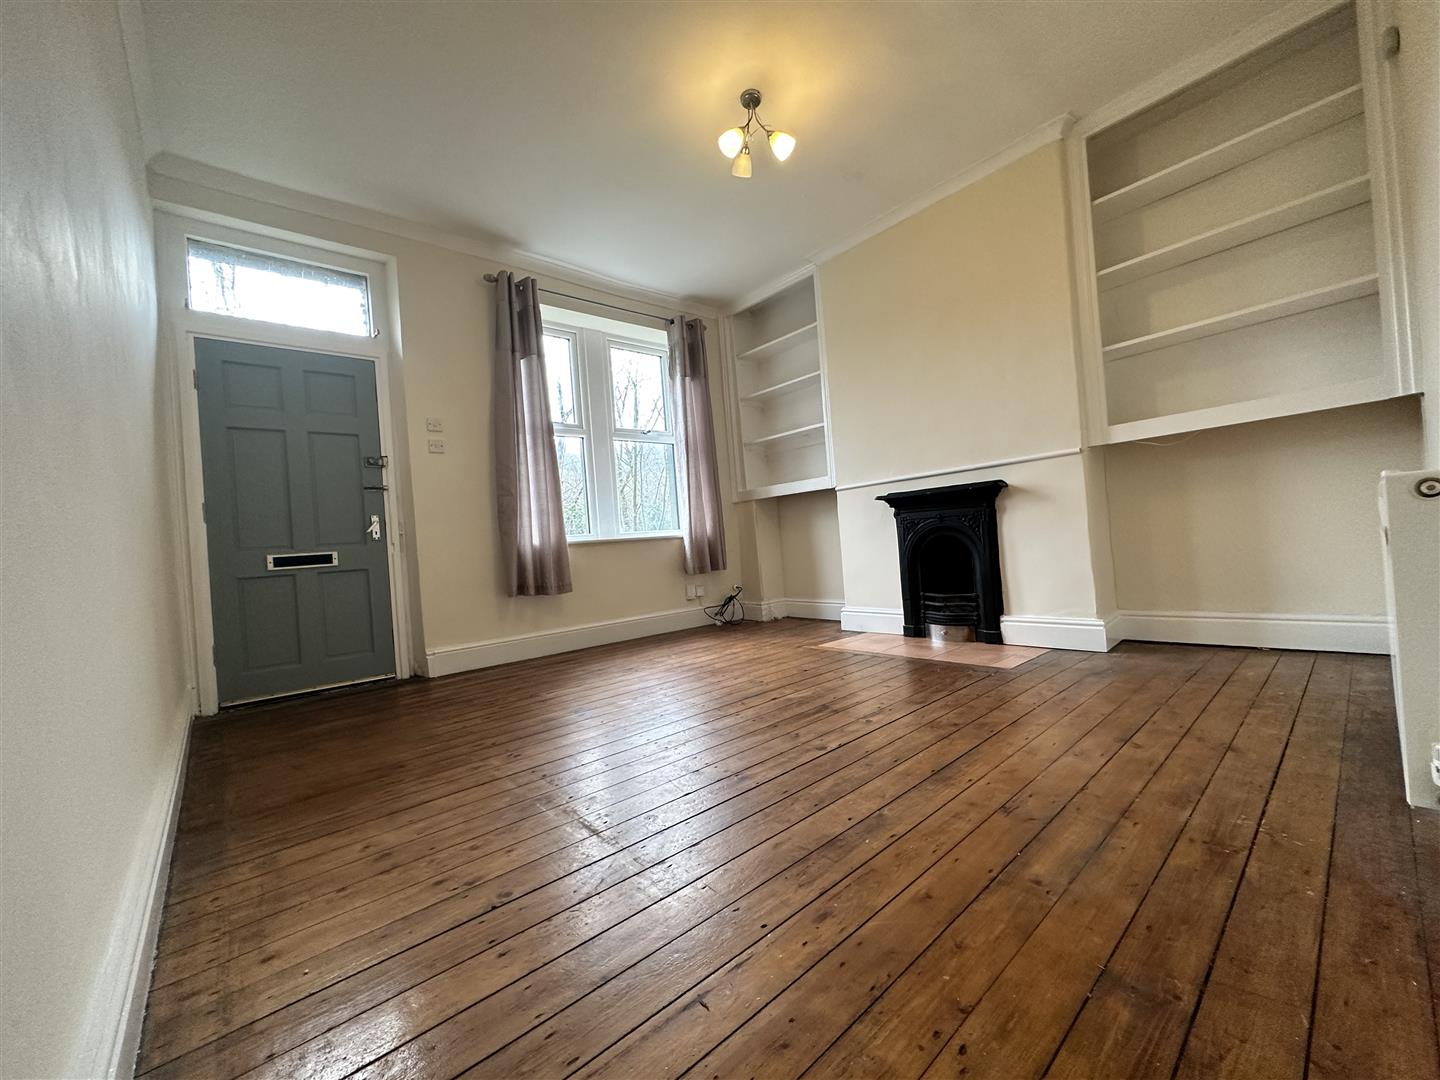 2 bed house for sale in Gaghills Terrace, Rossendale - Property Image 1